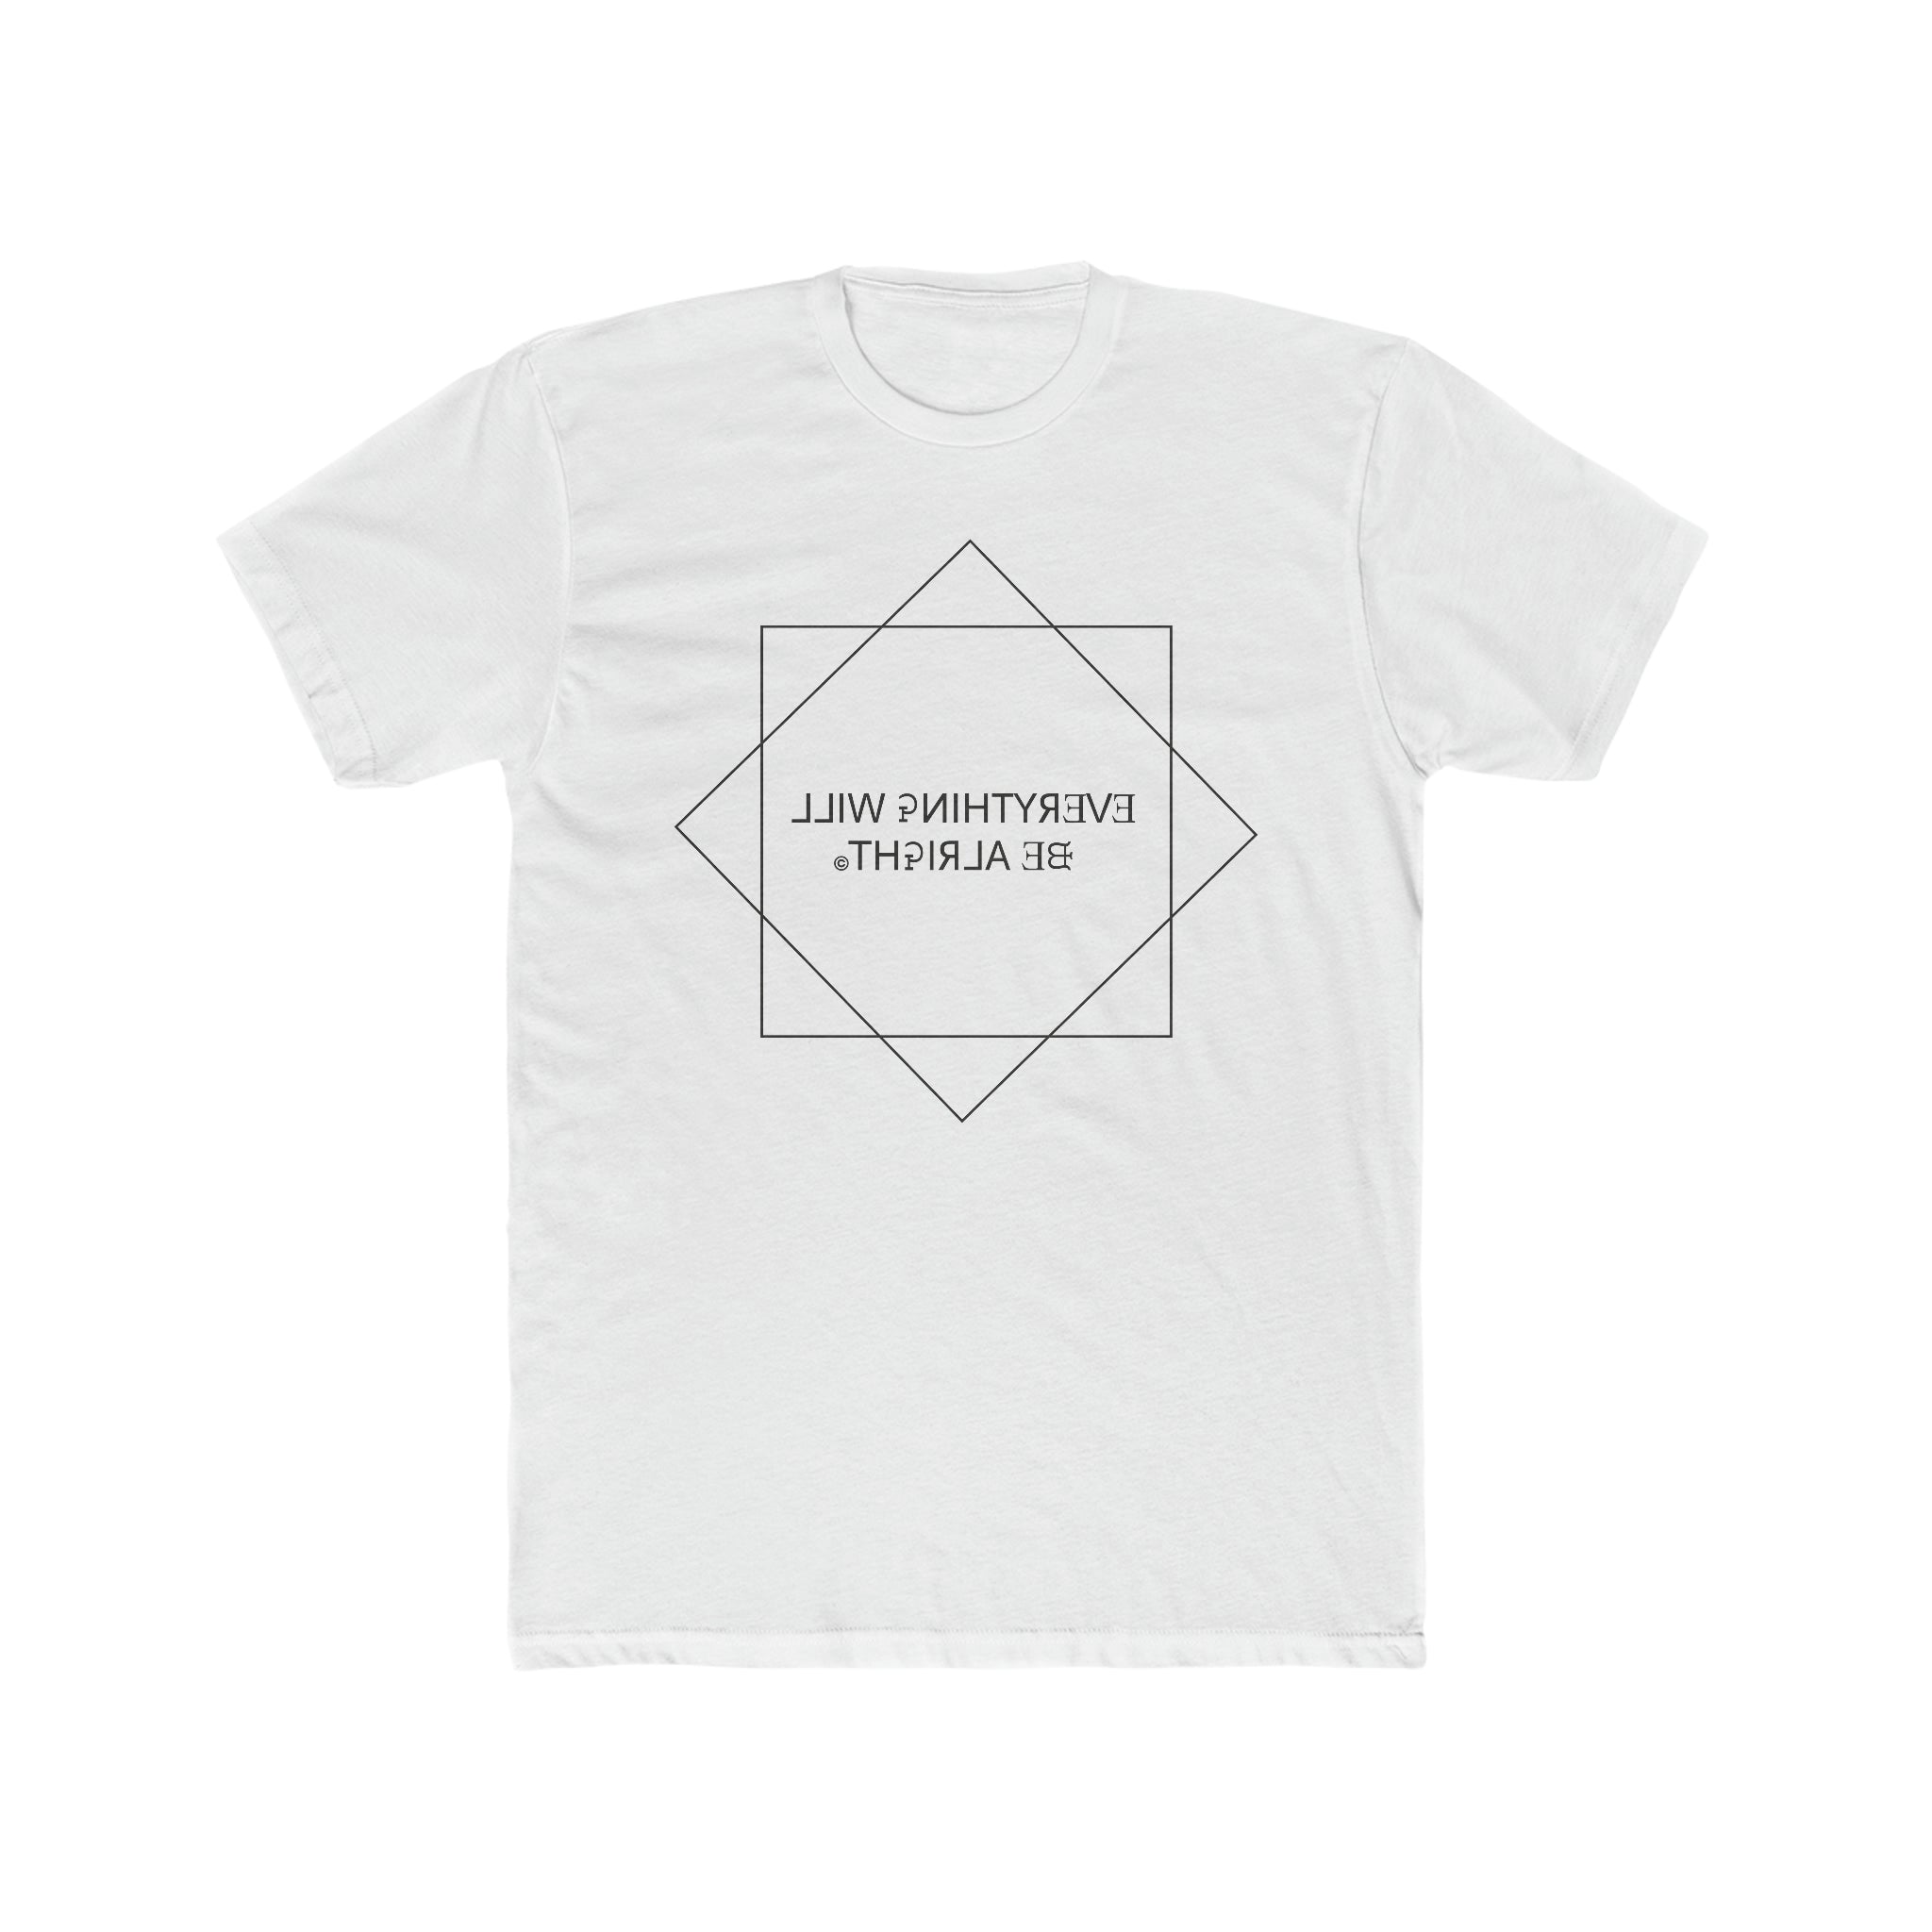 "Everything Will be Alright" Men's Cotton Crew Tee